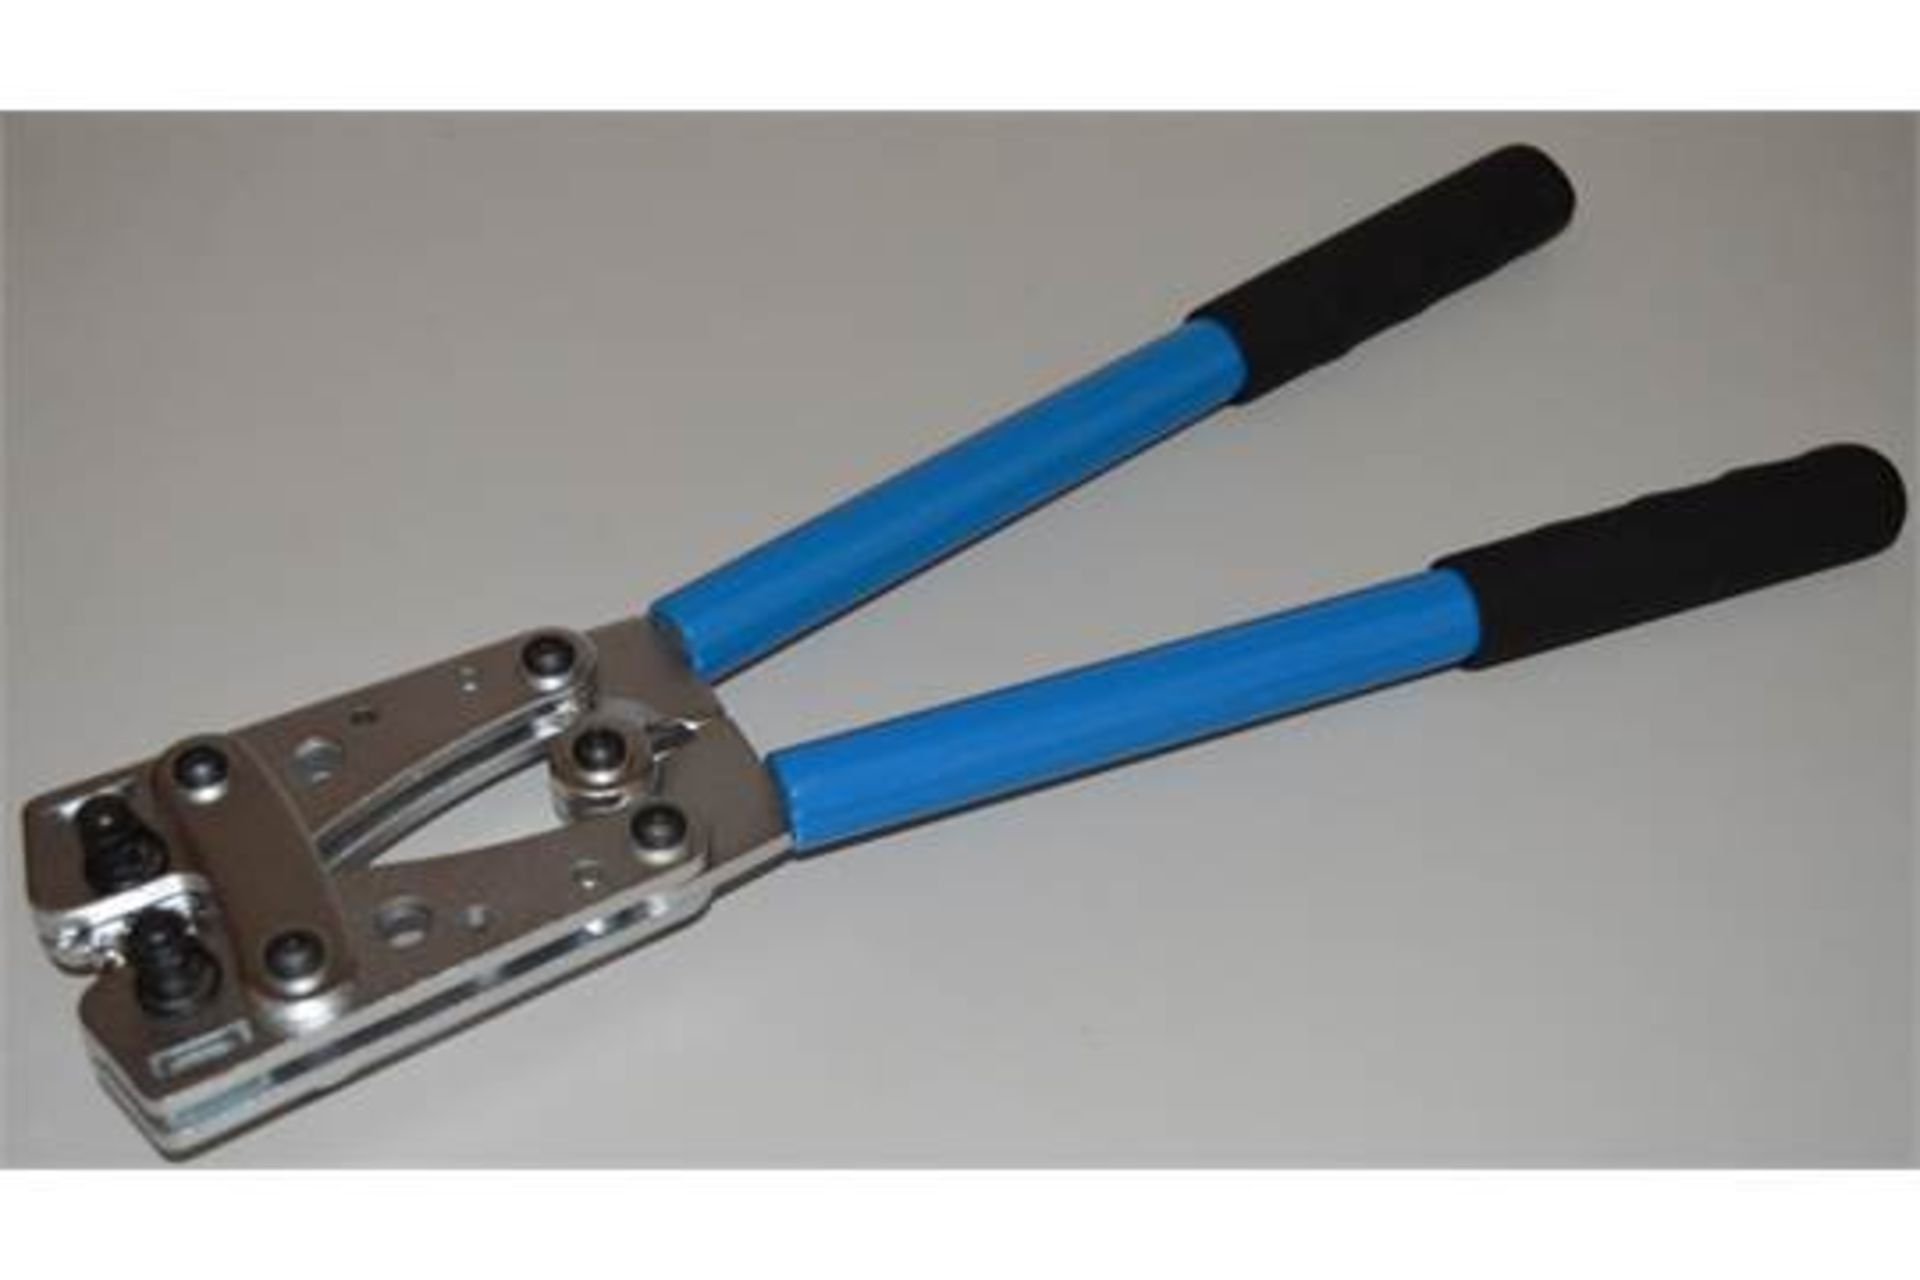 1 x HD Copper Tube Terminal Crimp Tool With Adjustable Hex - 38cm Length - XXX Branded - New and - Image 9 of 10